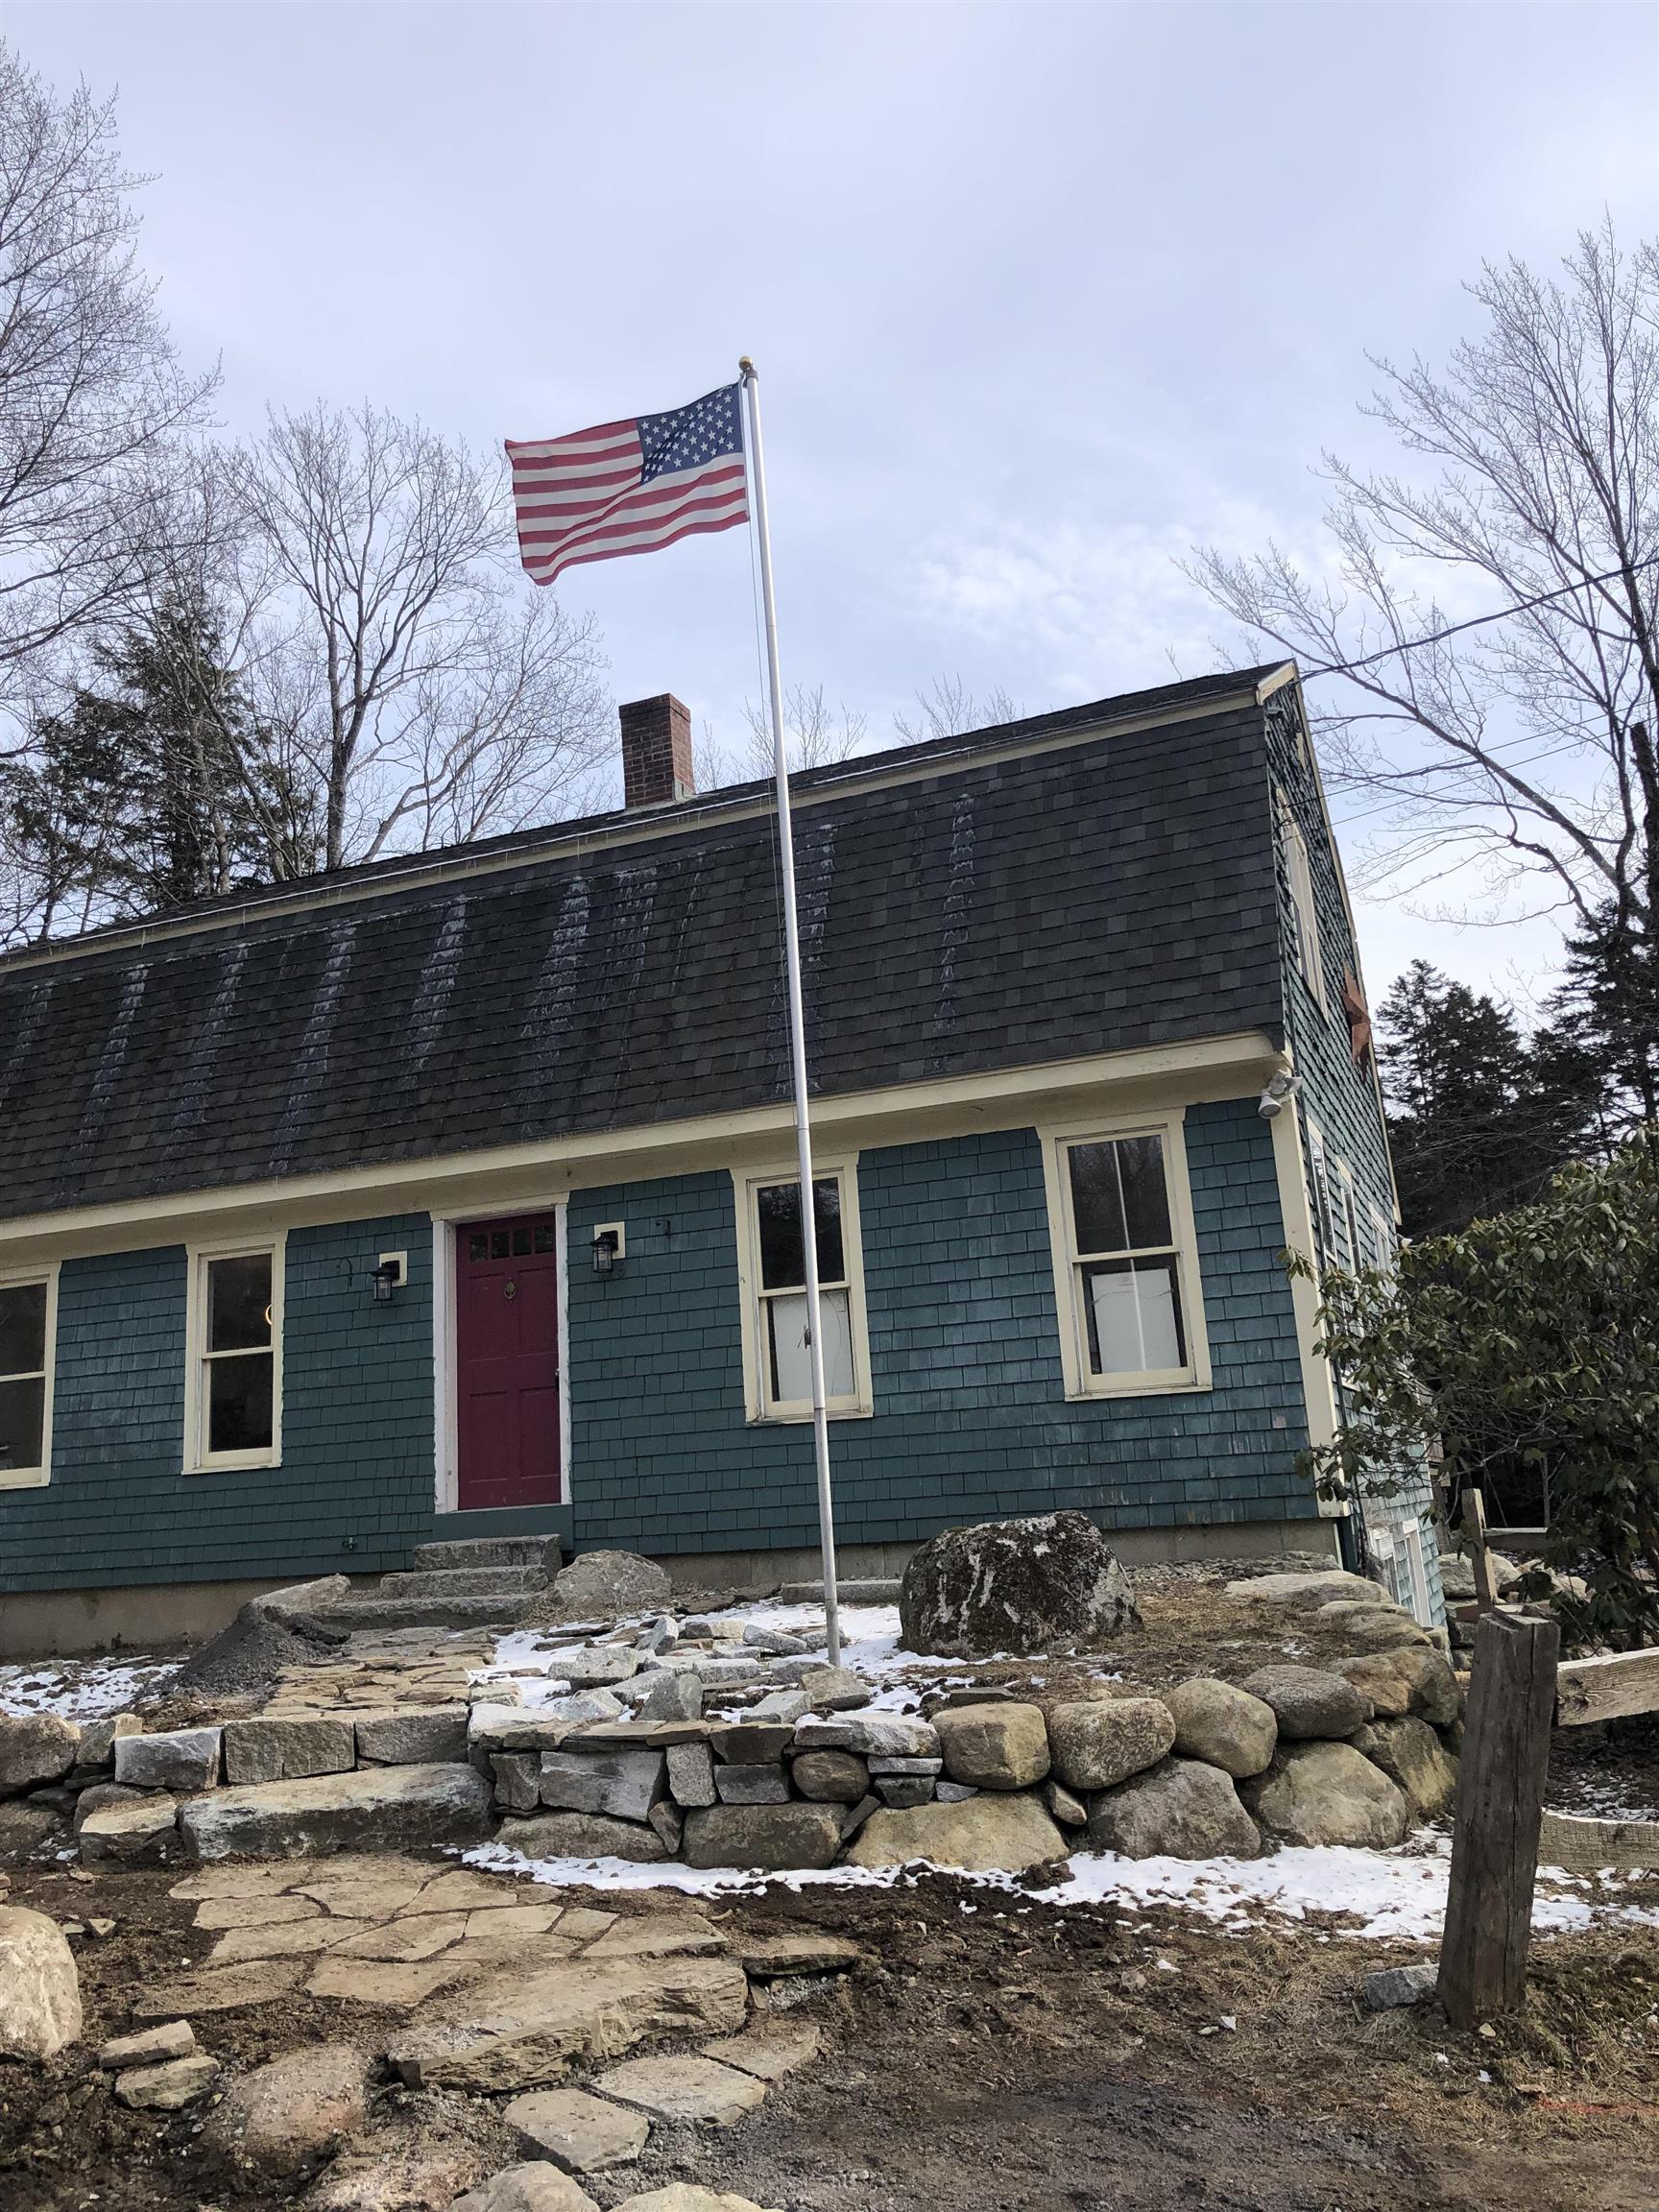 2 Story Single Family Home in New London NH